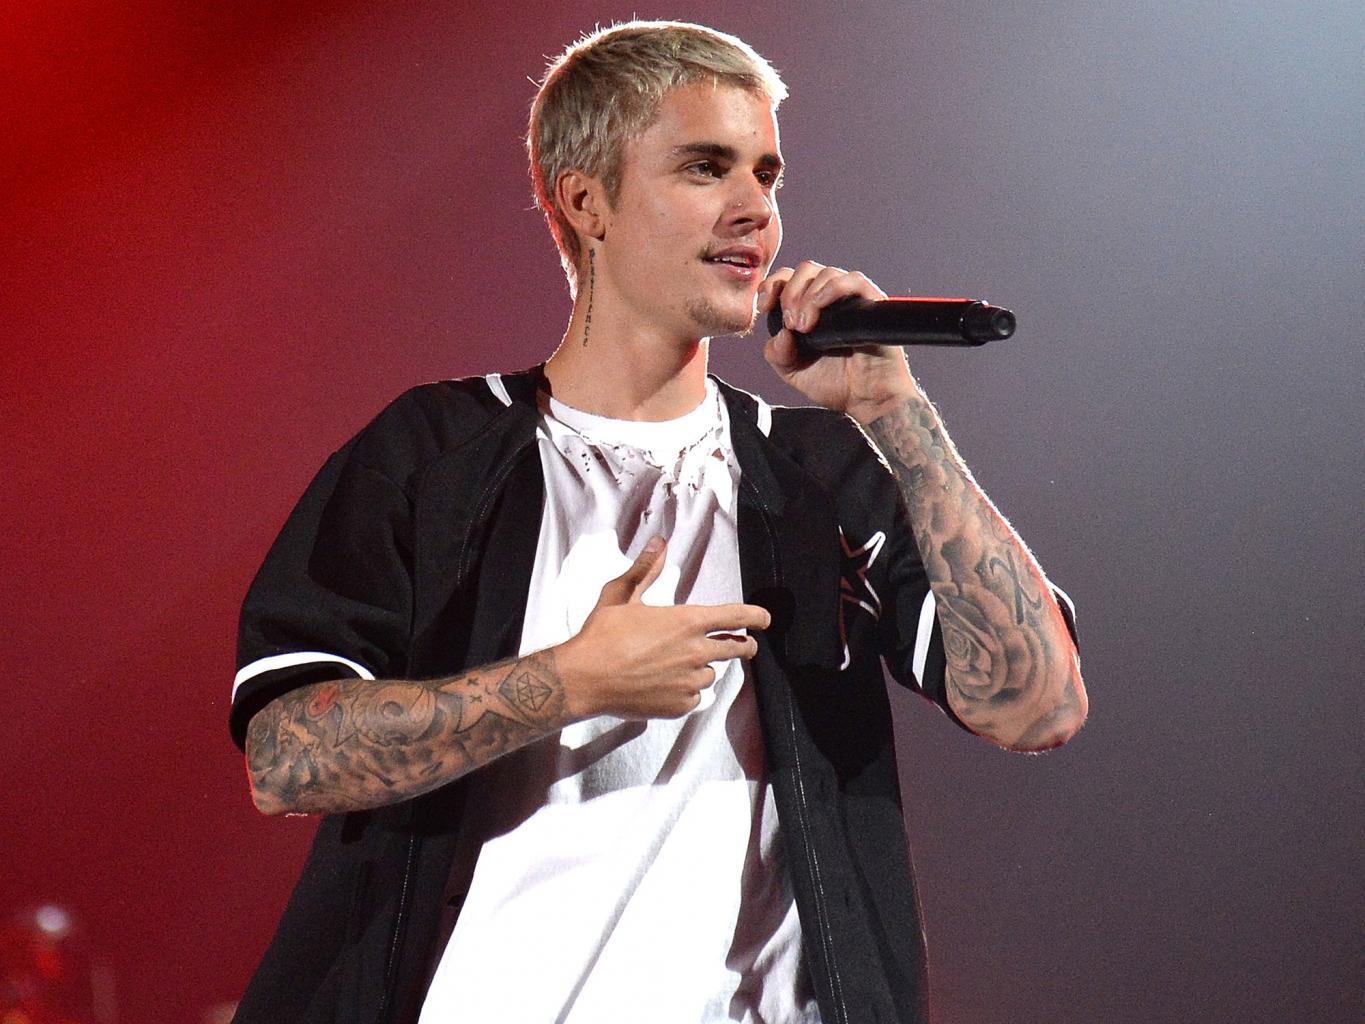 Justin Bieber Caught on Video Punching a Fan Who Reached into His Car in Barcelona